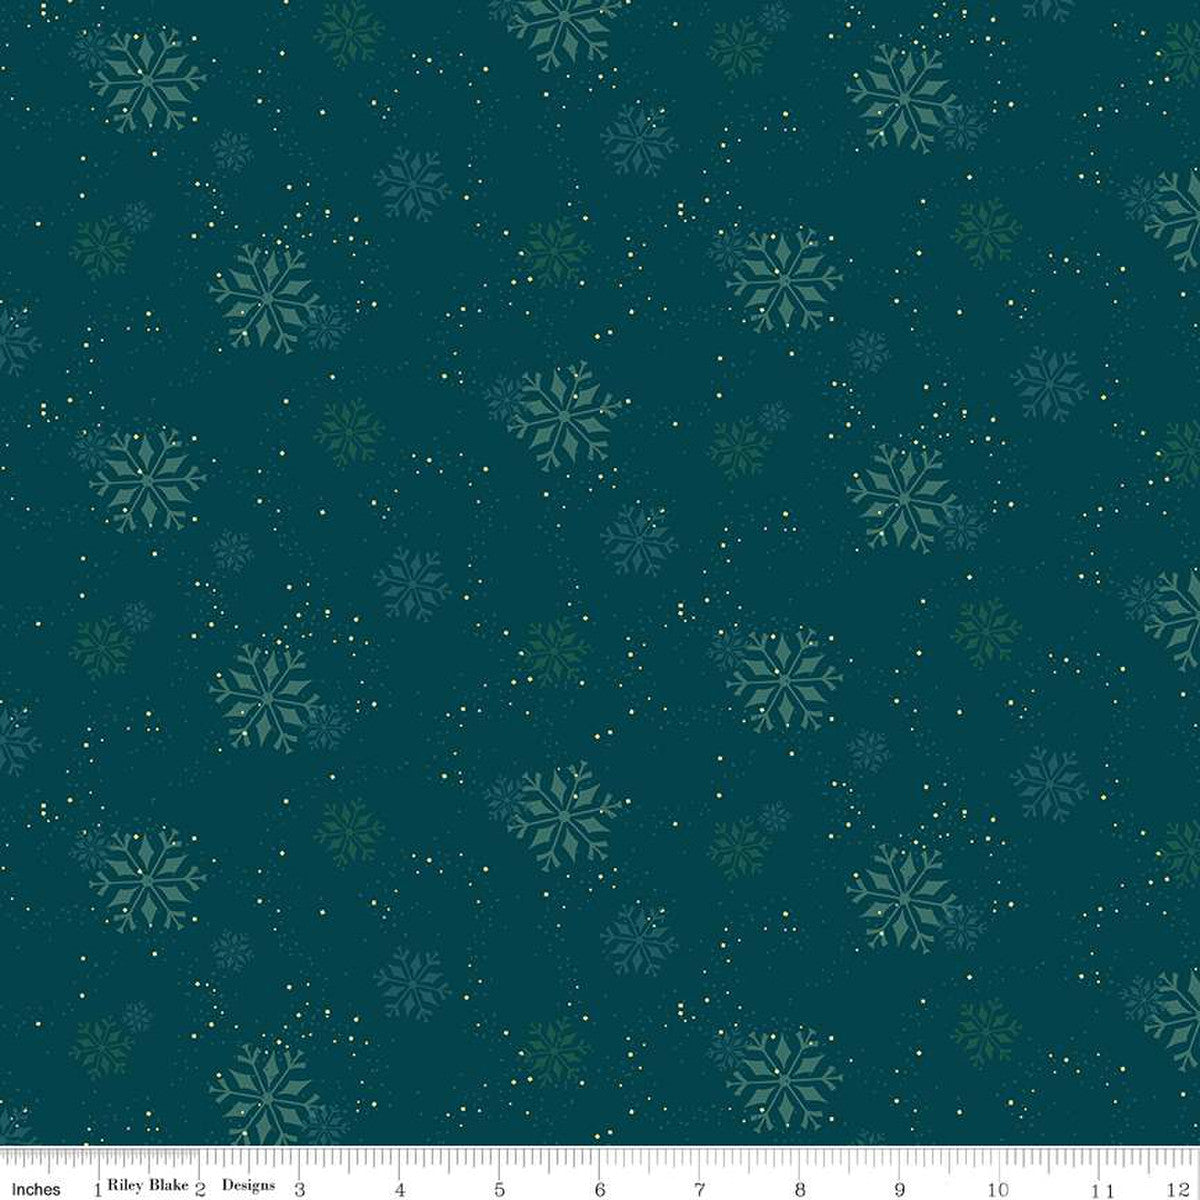 In From The Cold Snowflakes Navy Yardage by Heather Peterson | Riley Blake Designs #C14865-NAVY